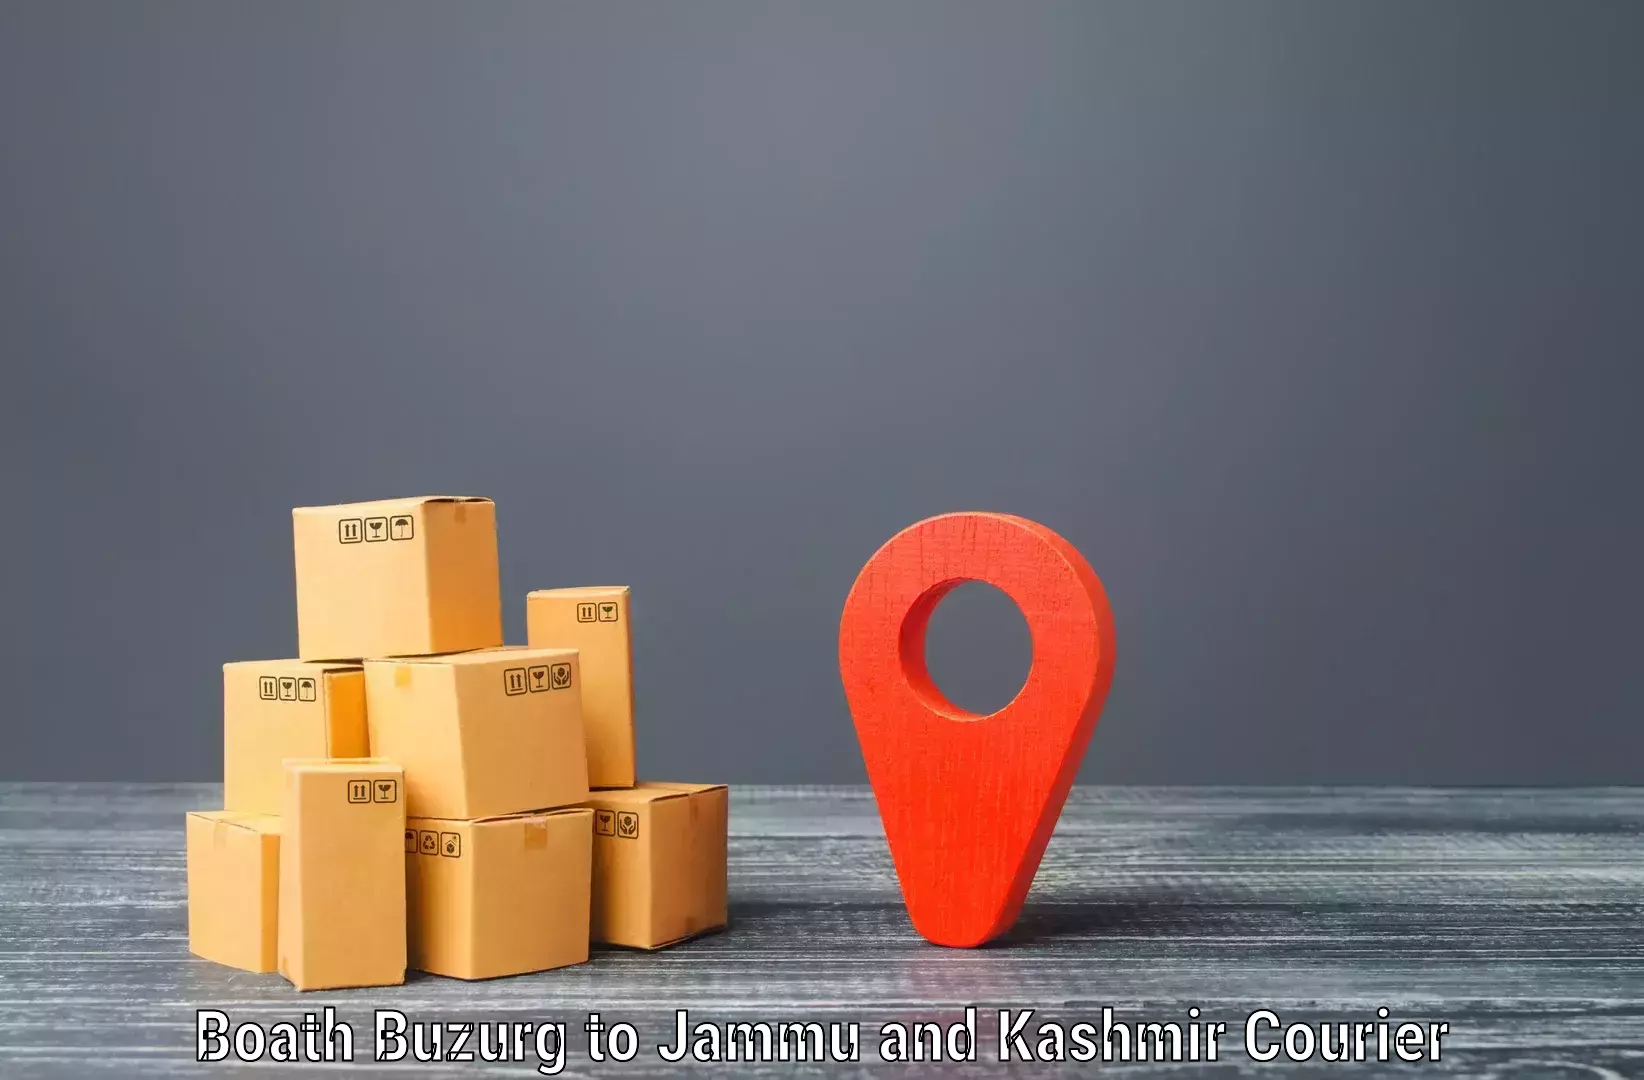 Express delivery network Boath Buzurg to Kulgam